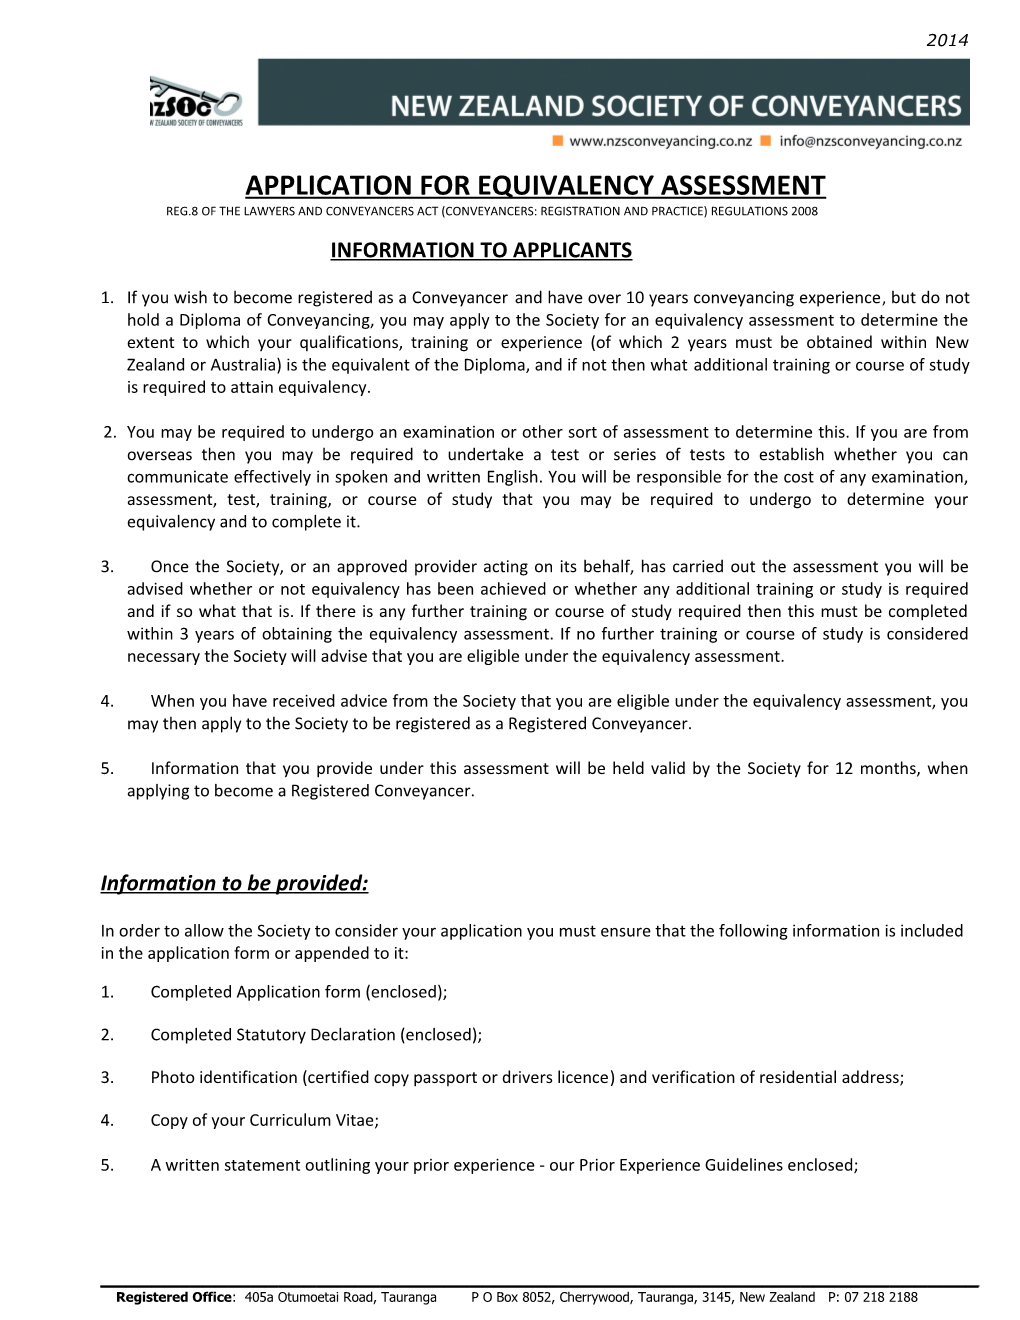 Application for Equivalency Assessment